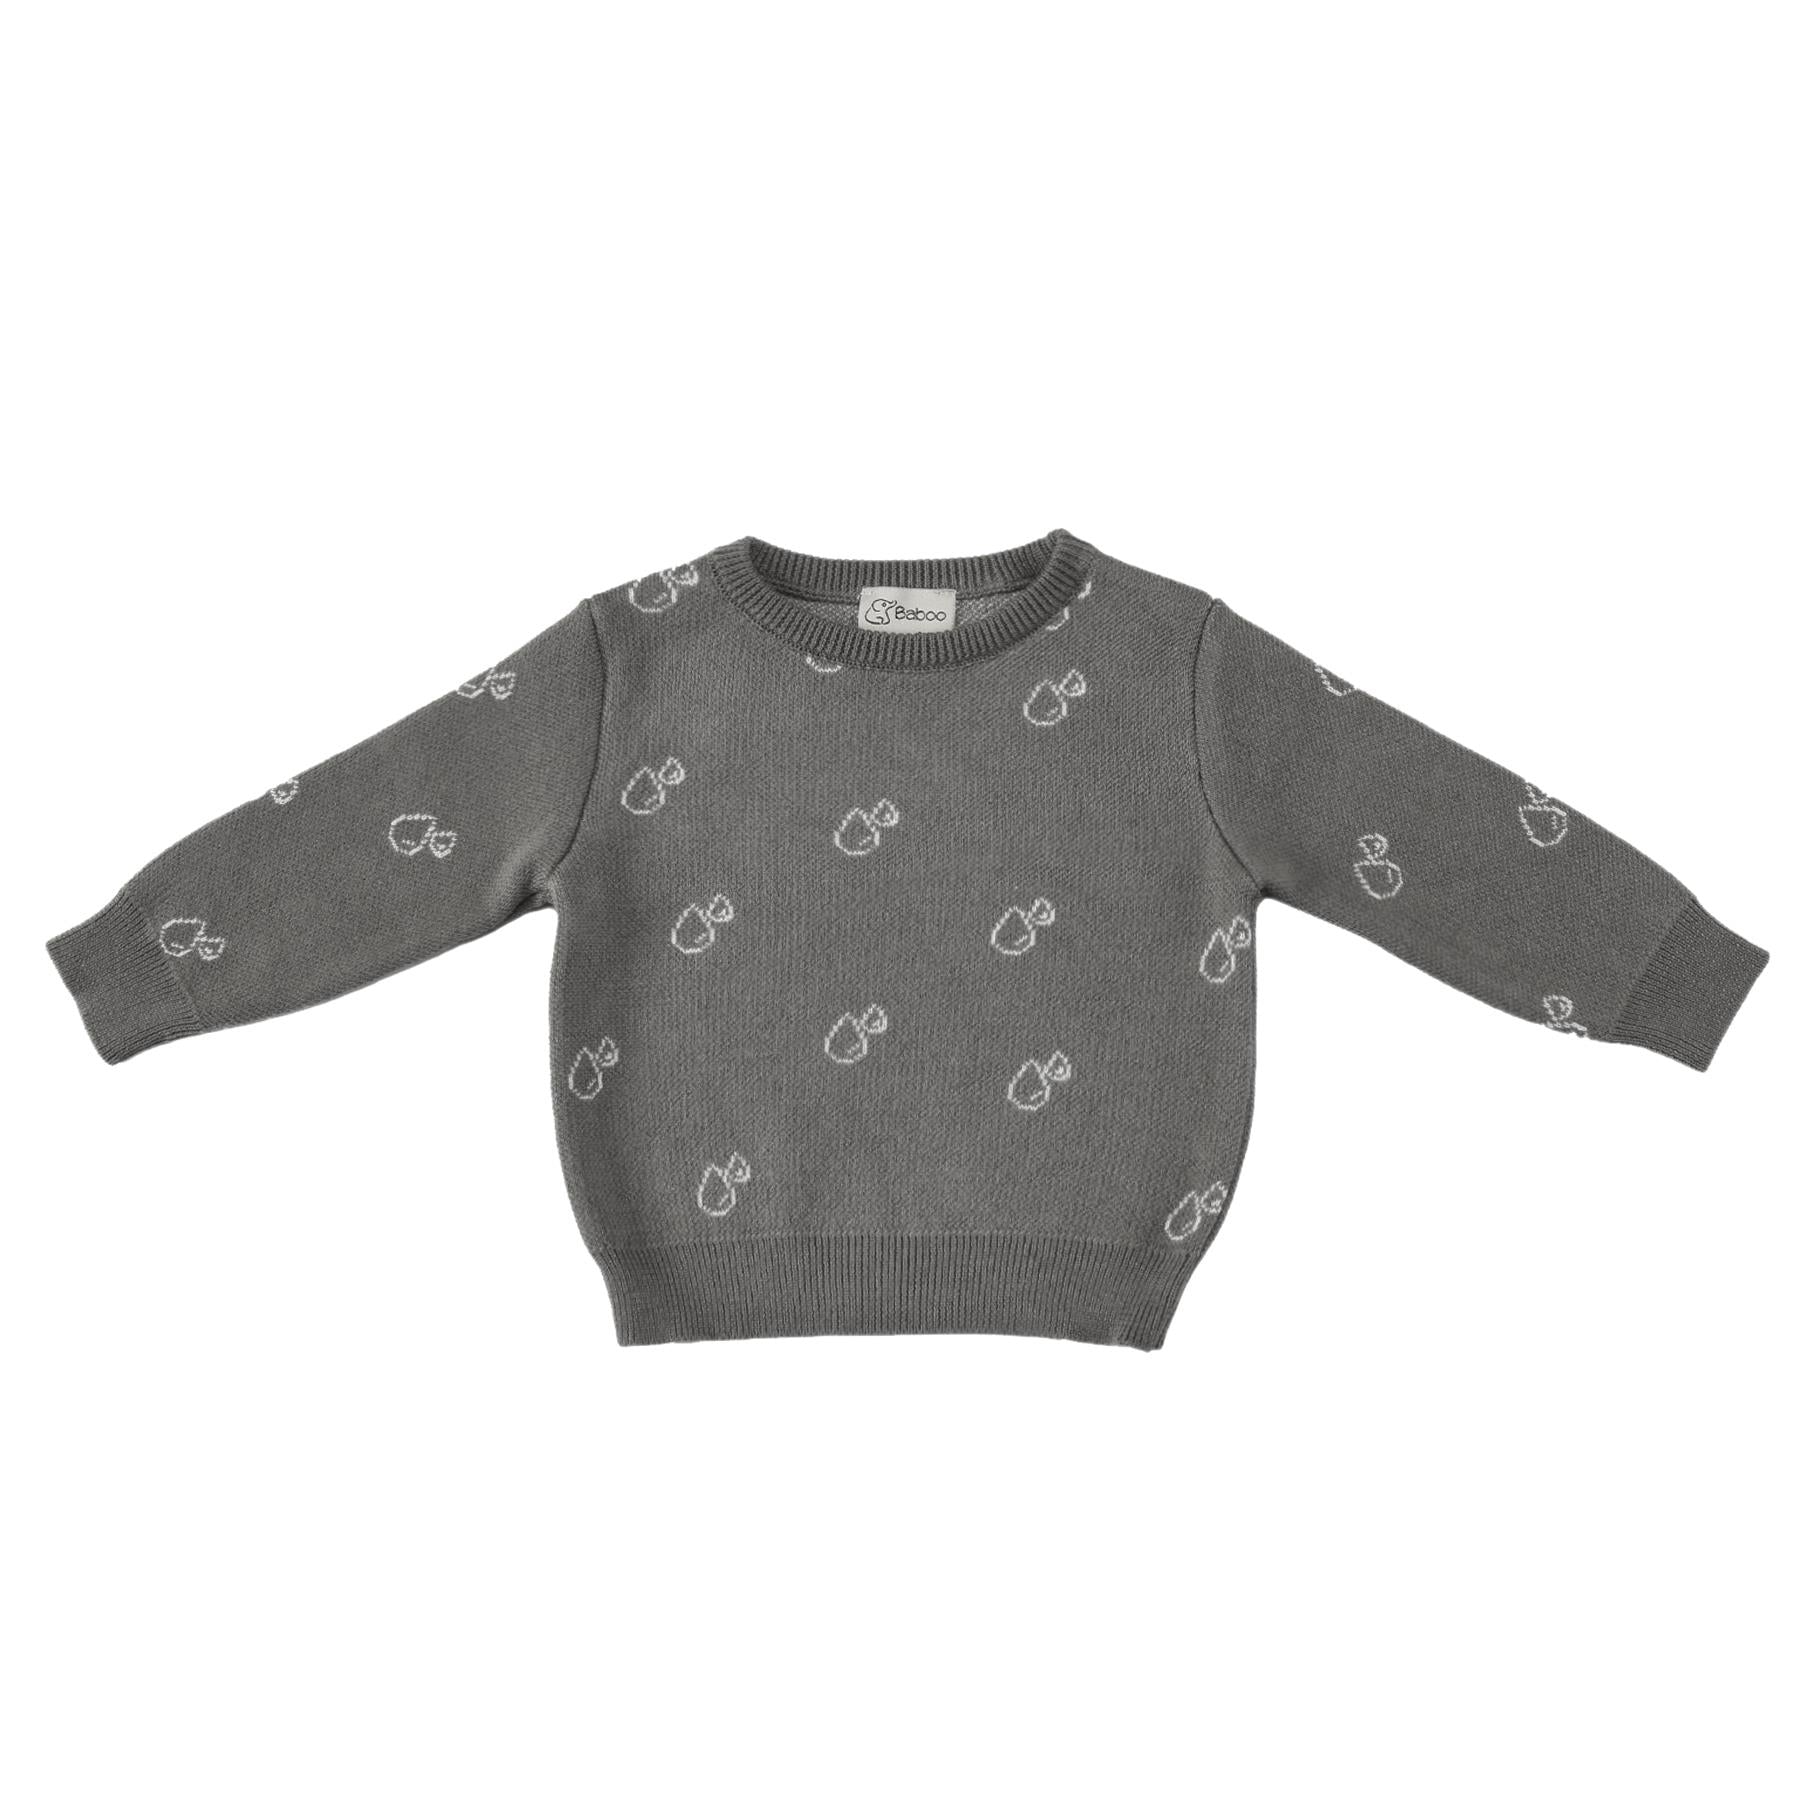 Patterned Organic Cotton Baby and Kids Sweater Gray